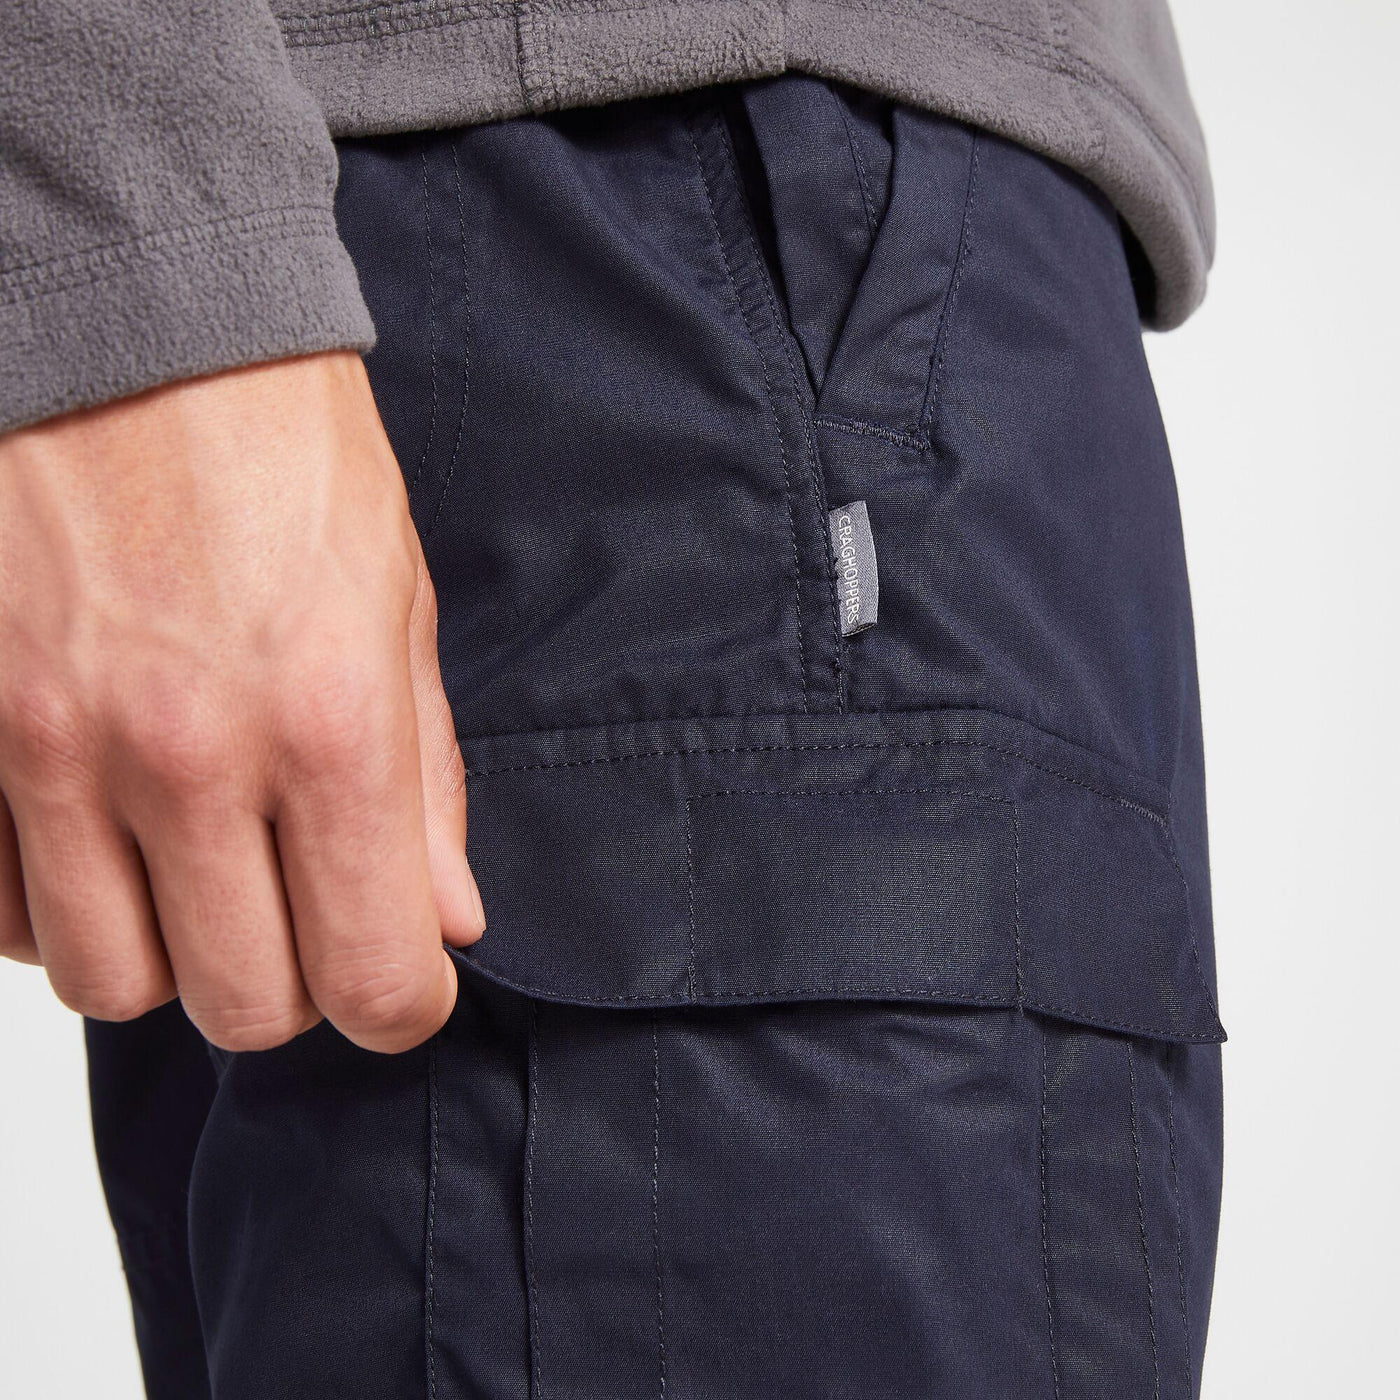 Craghoppers Expert Kiwi Tailored Trousers